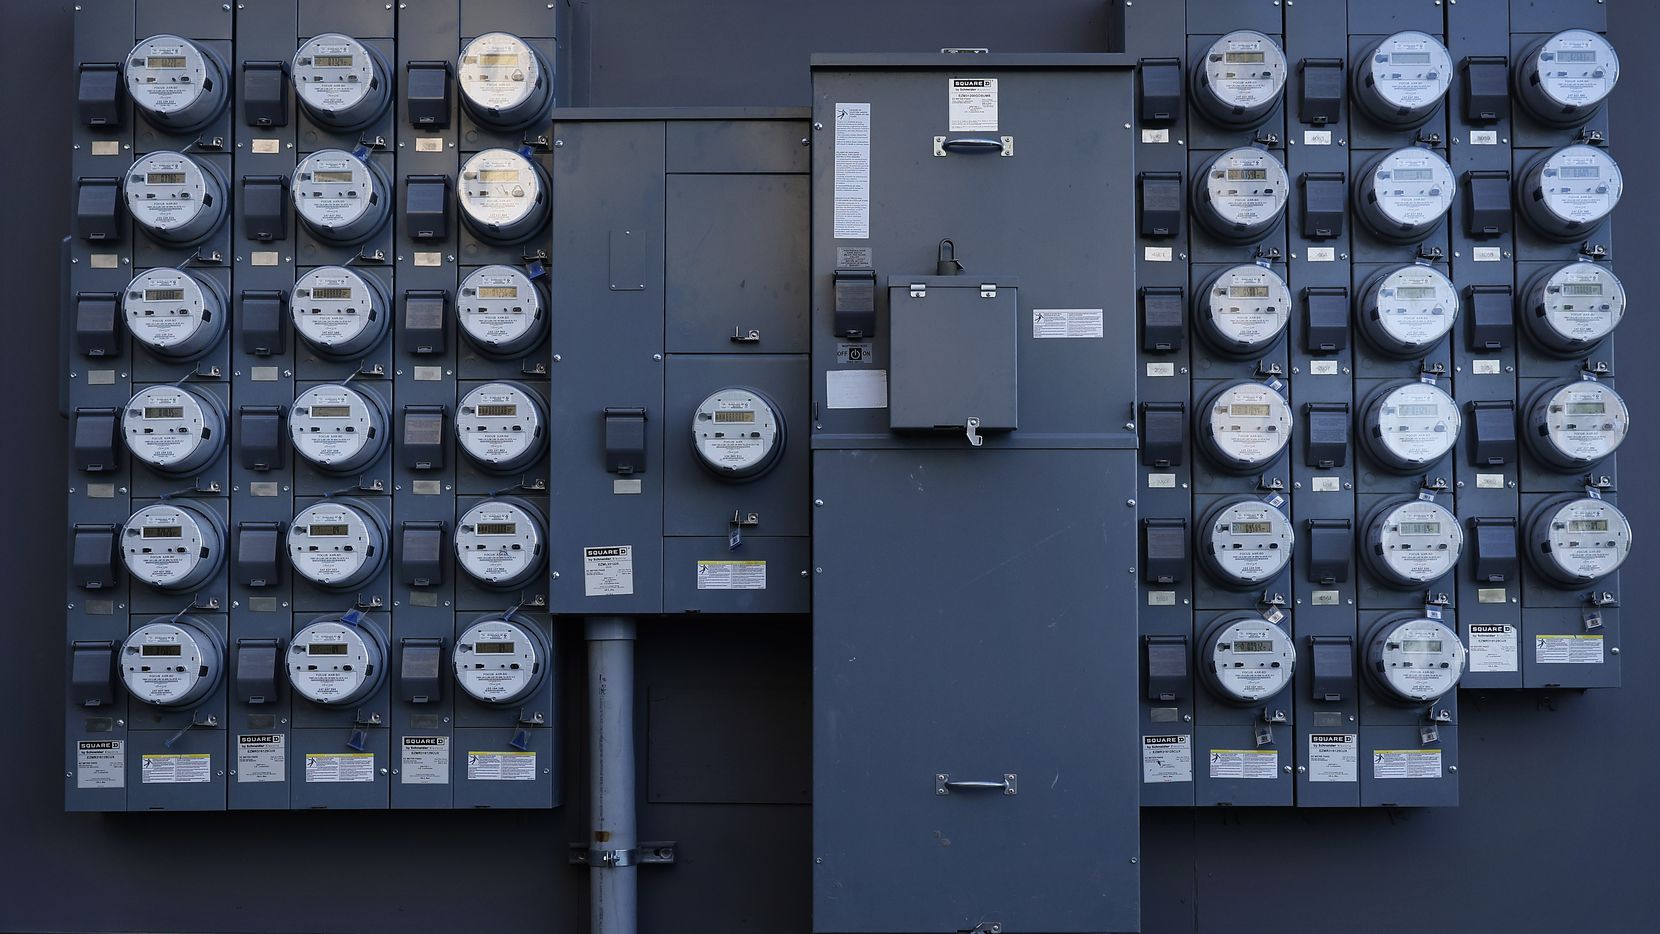 Rows of apartment electrical meters line the wall near downtown Dallas. While gasoline...